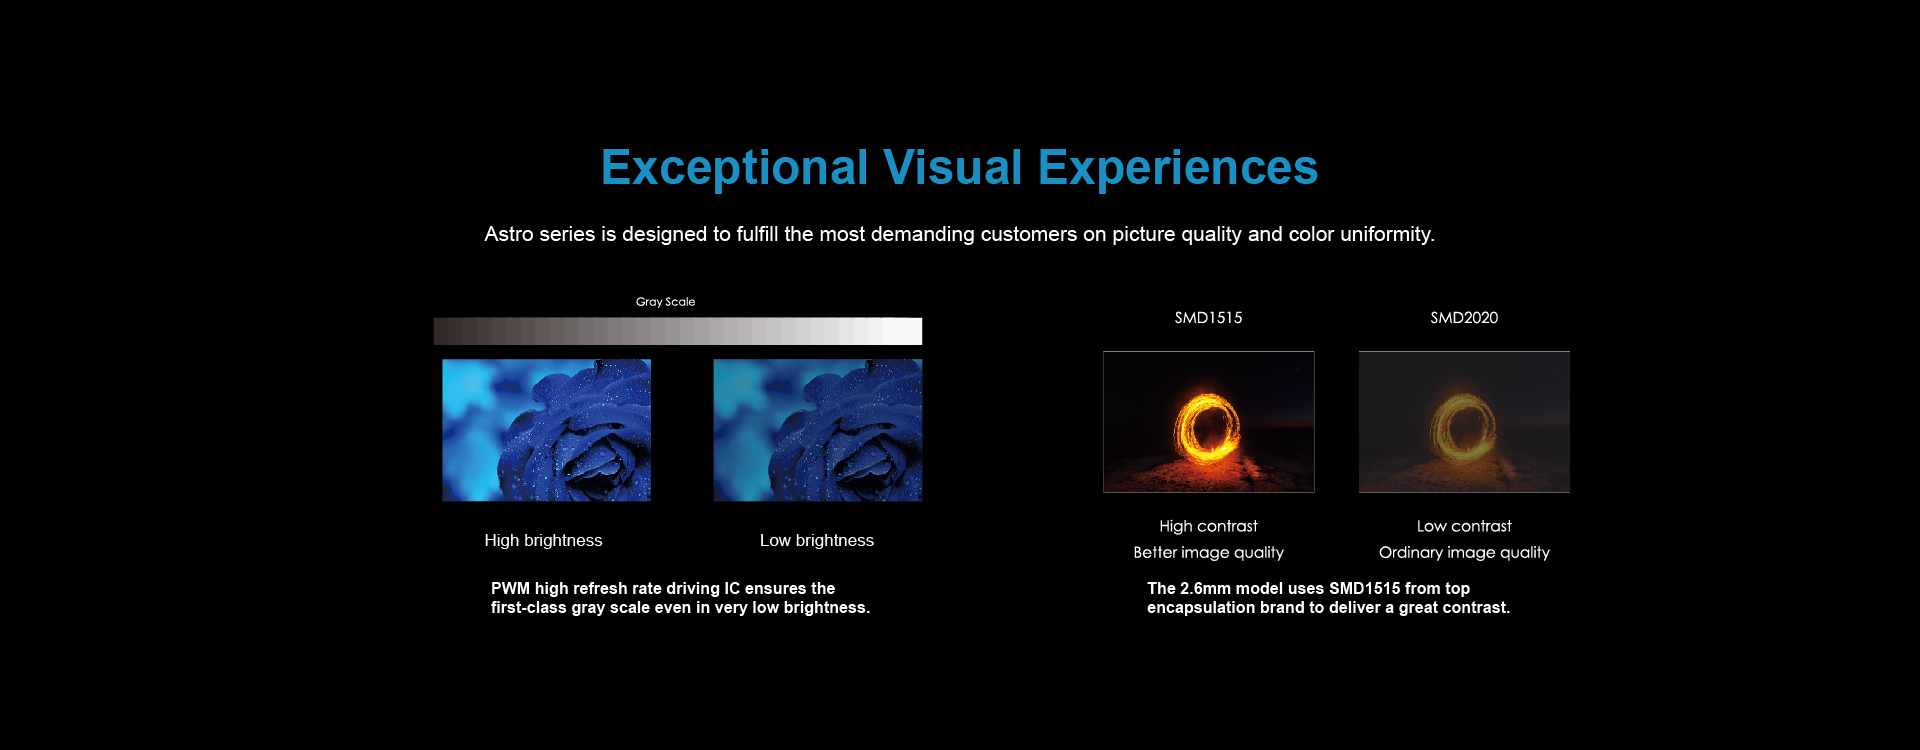 Exceptional Visual Experiences